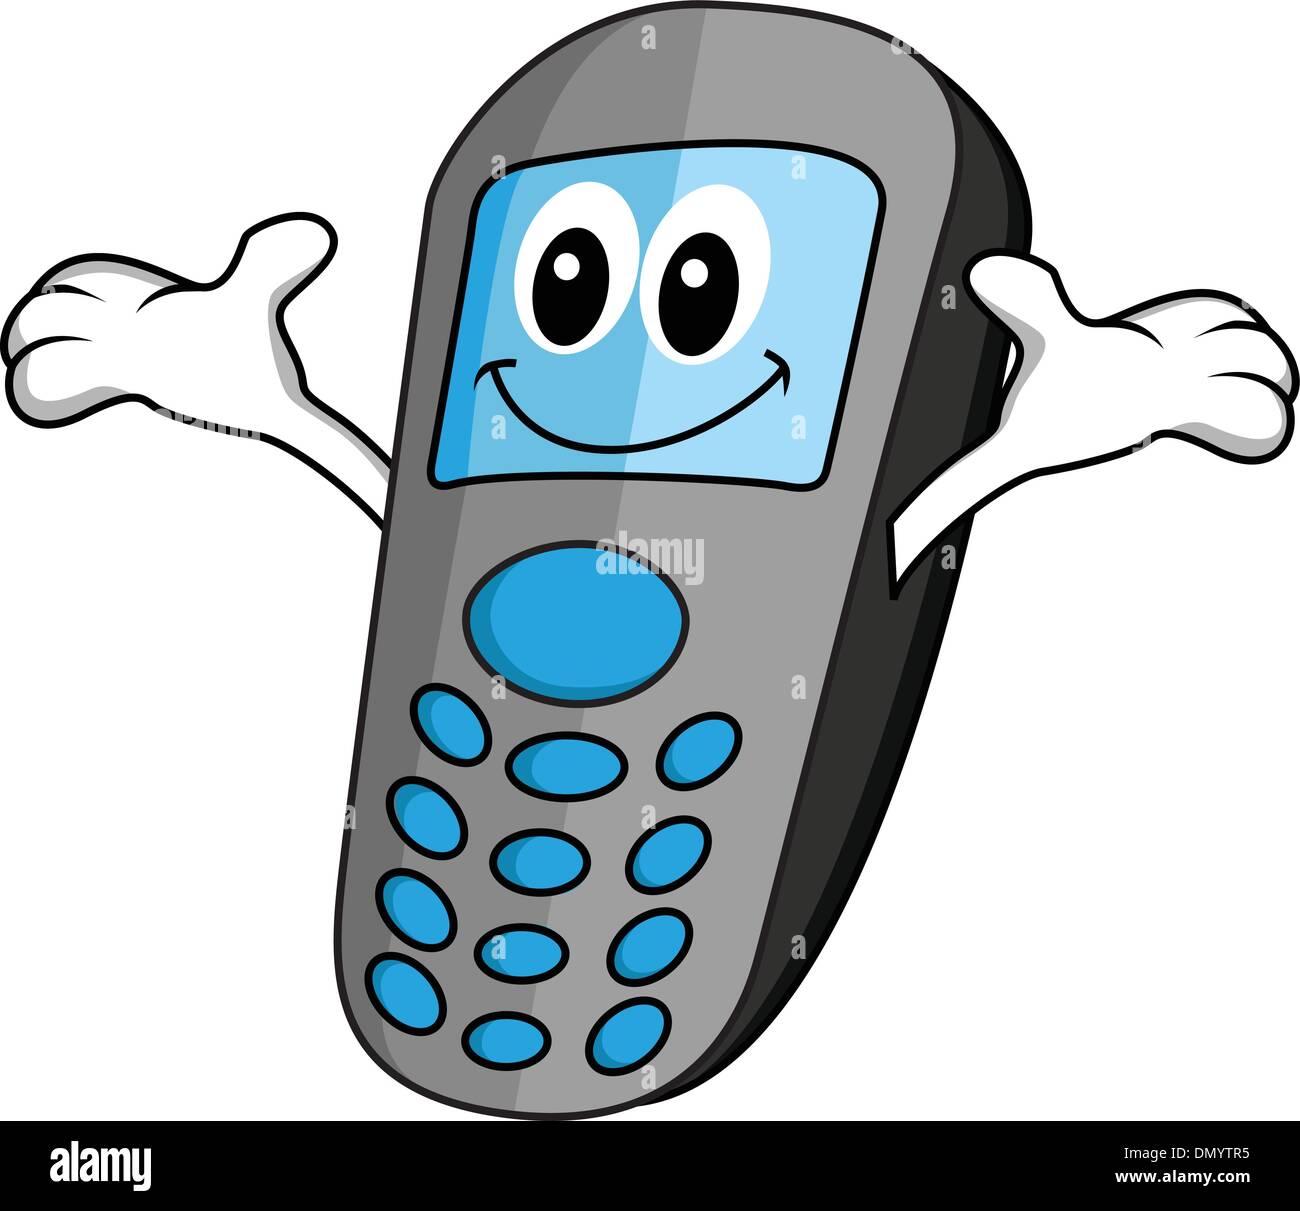 cartoons about cell phone addiction